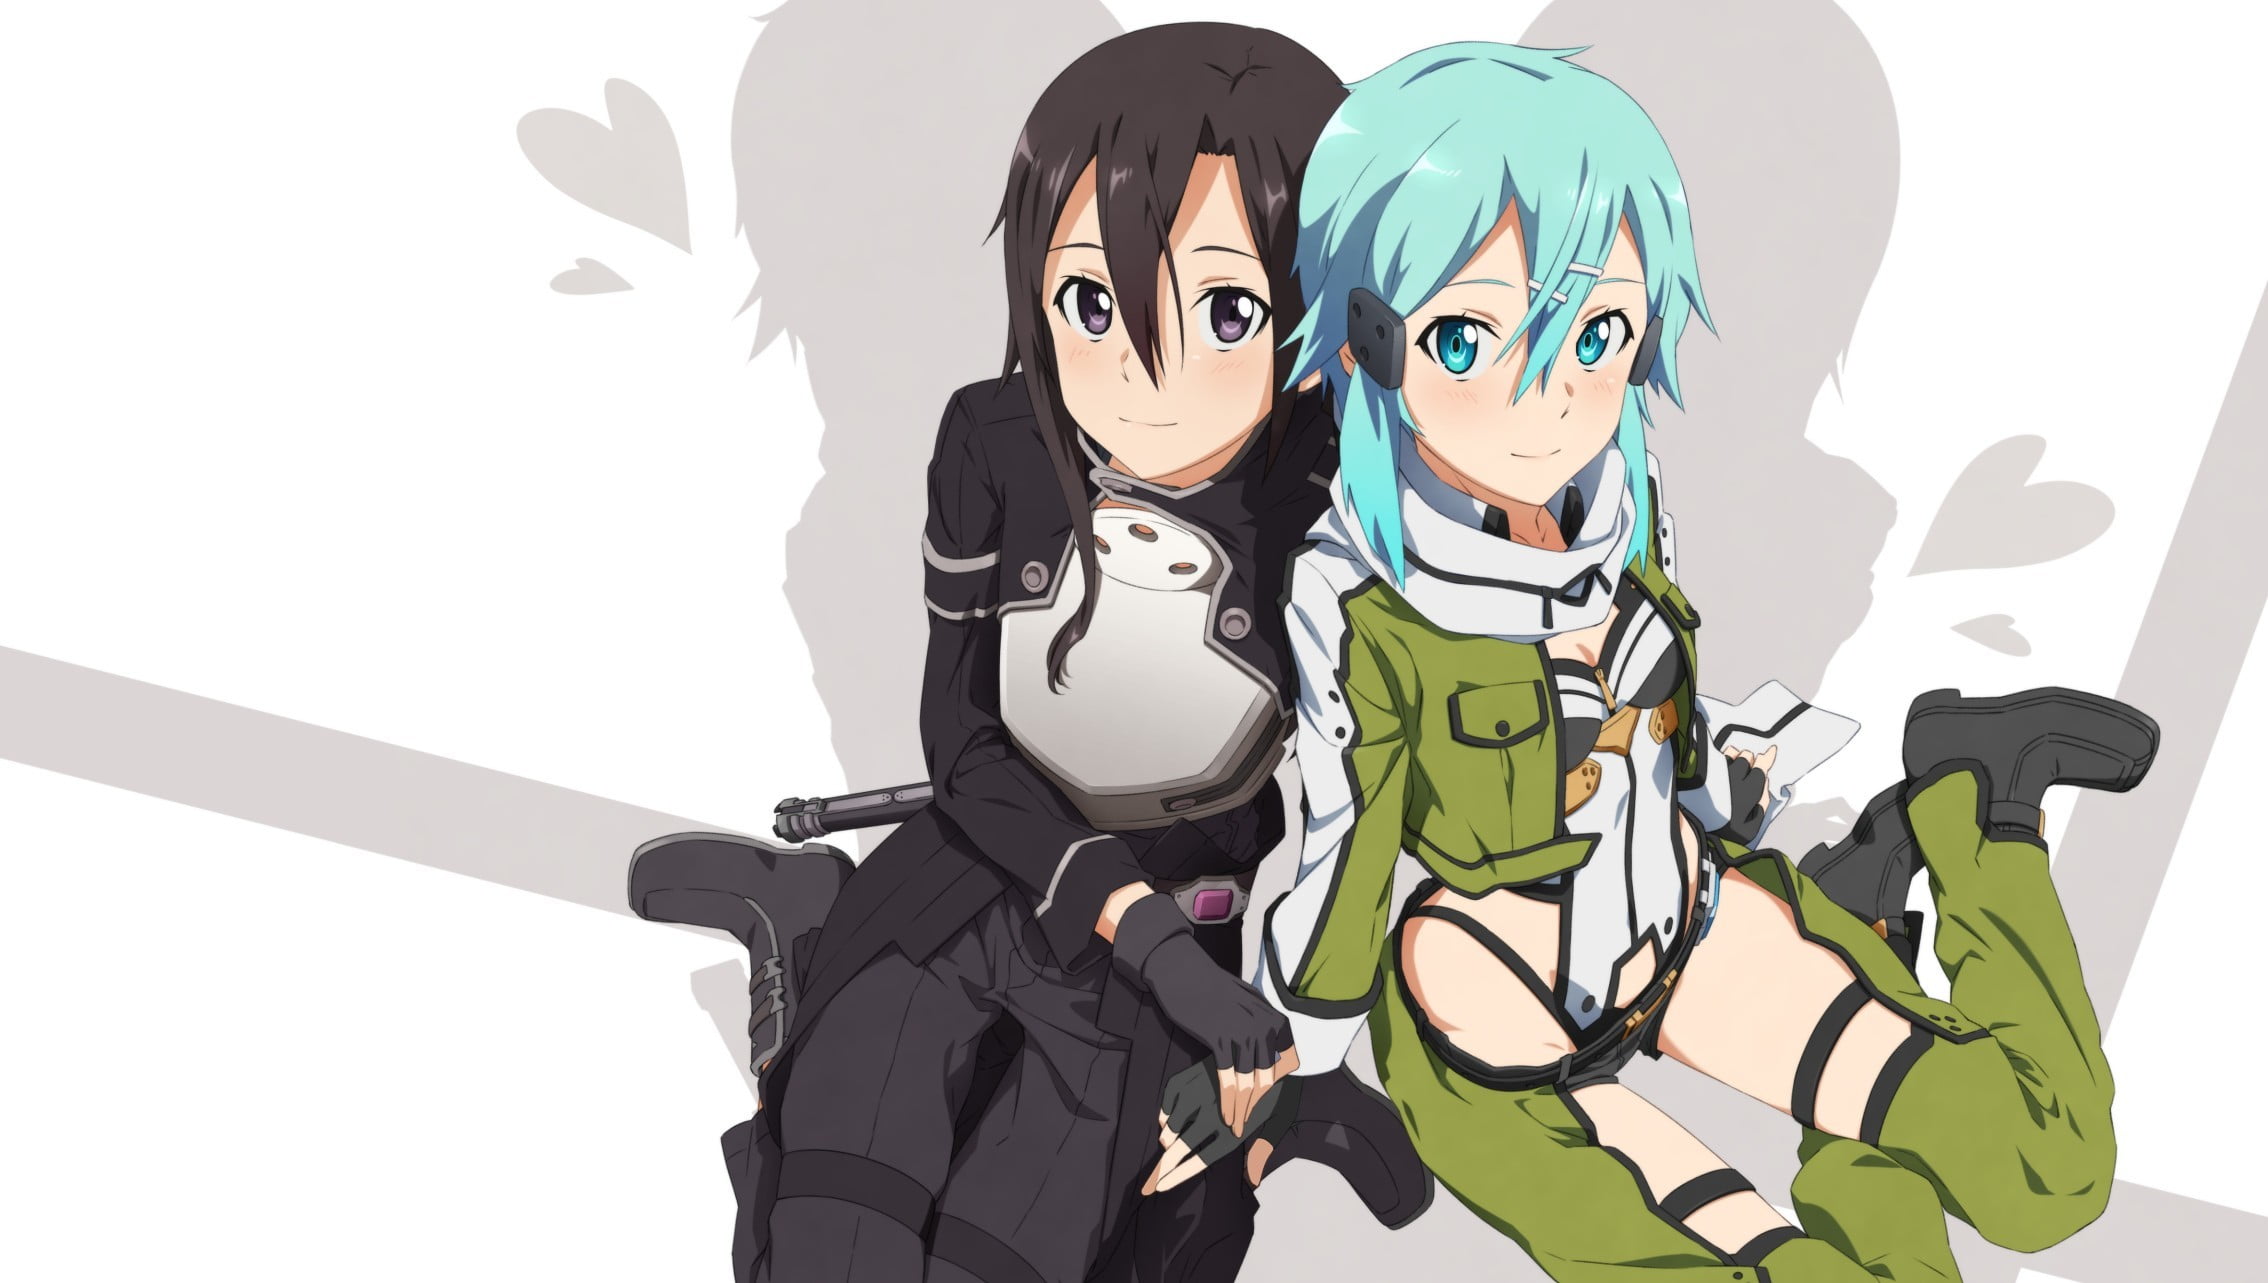 two female anime characters illustration, girl, sword, game, pretty